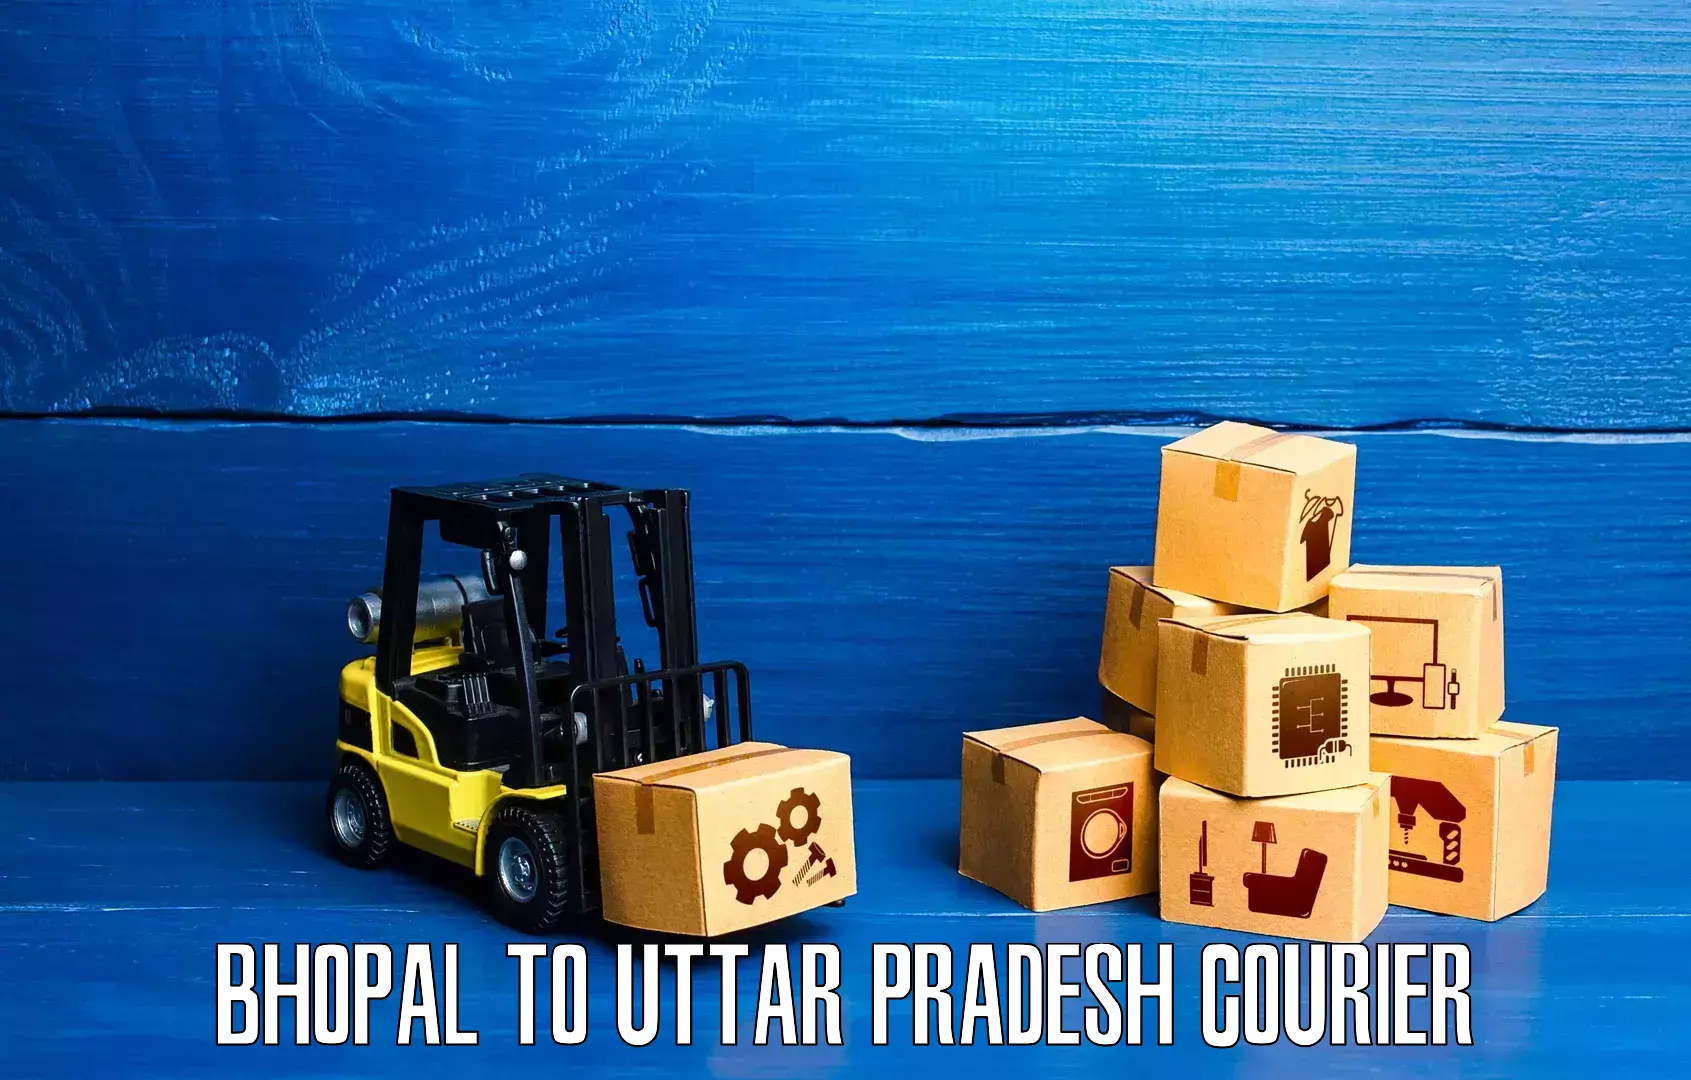 Comprehensive shipping network Bhopal to Aunrihar